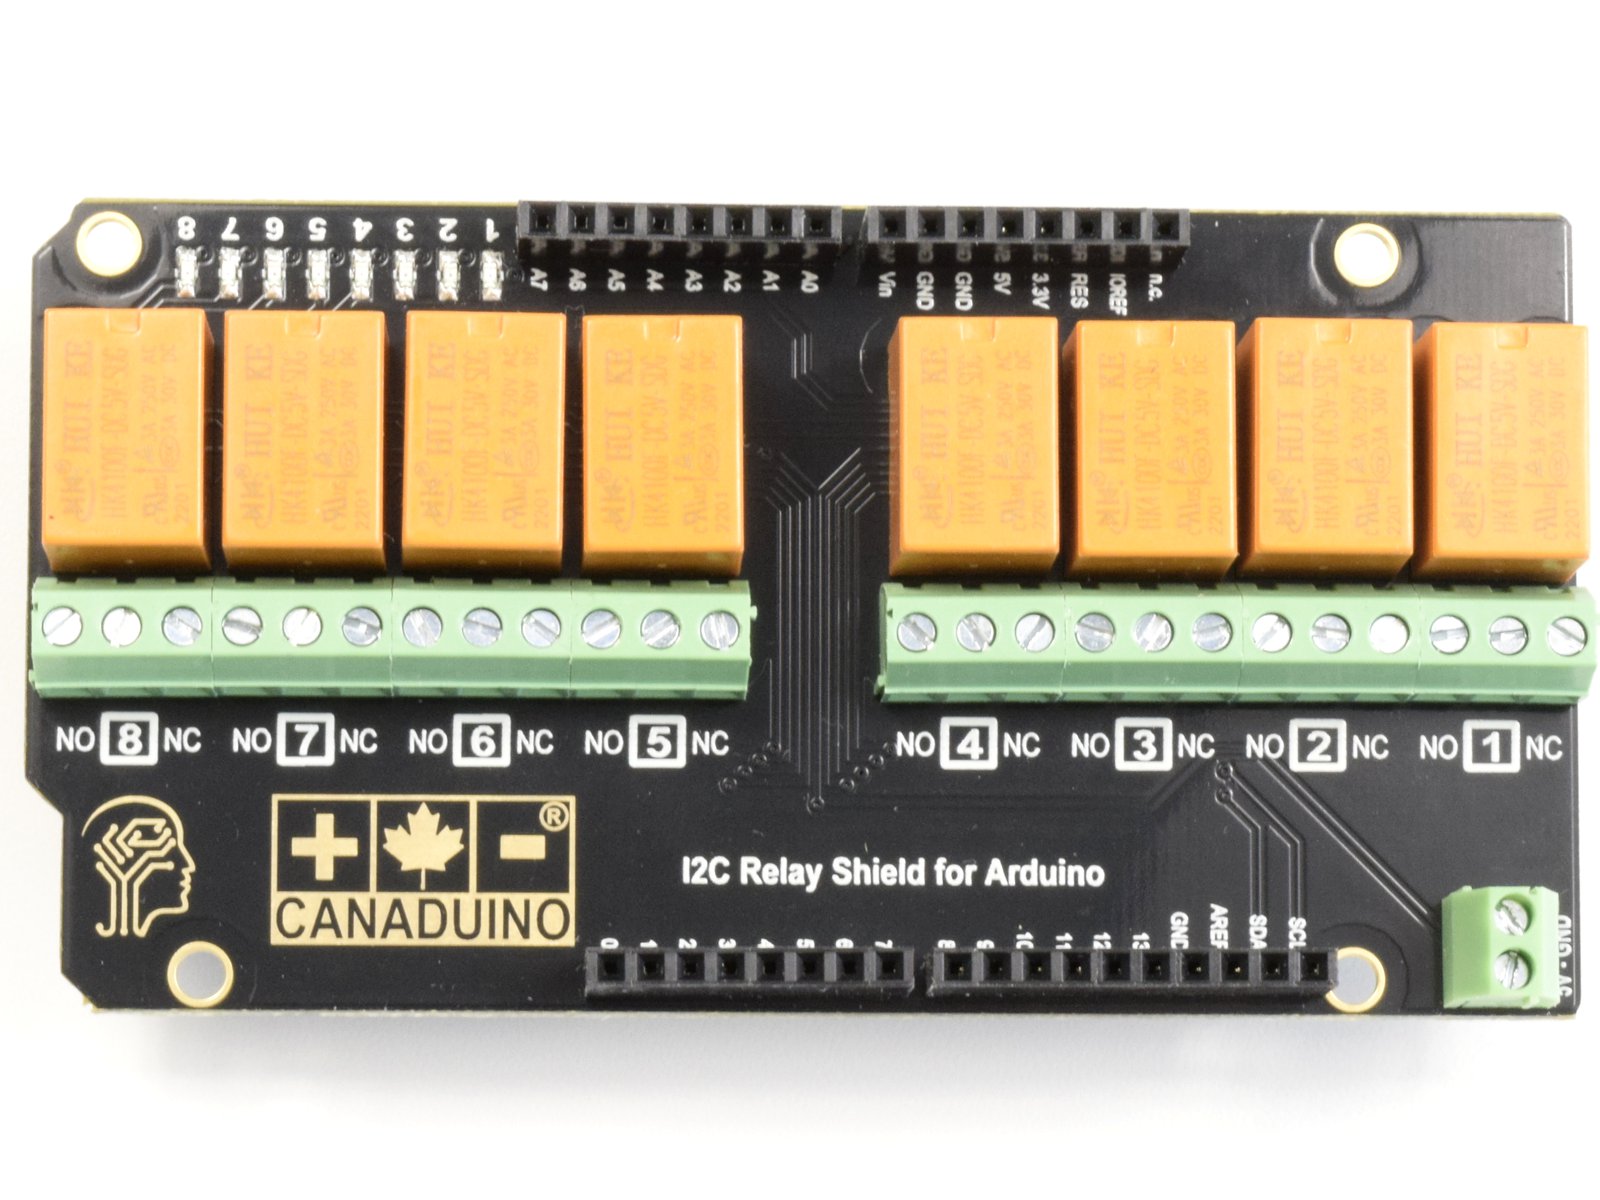 CANADUINO 8-Channel Stackable I2C Relay Shield for Arduino – DIY Kit 5